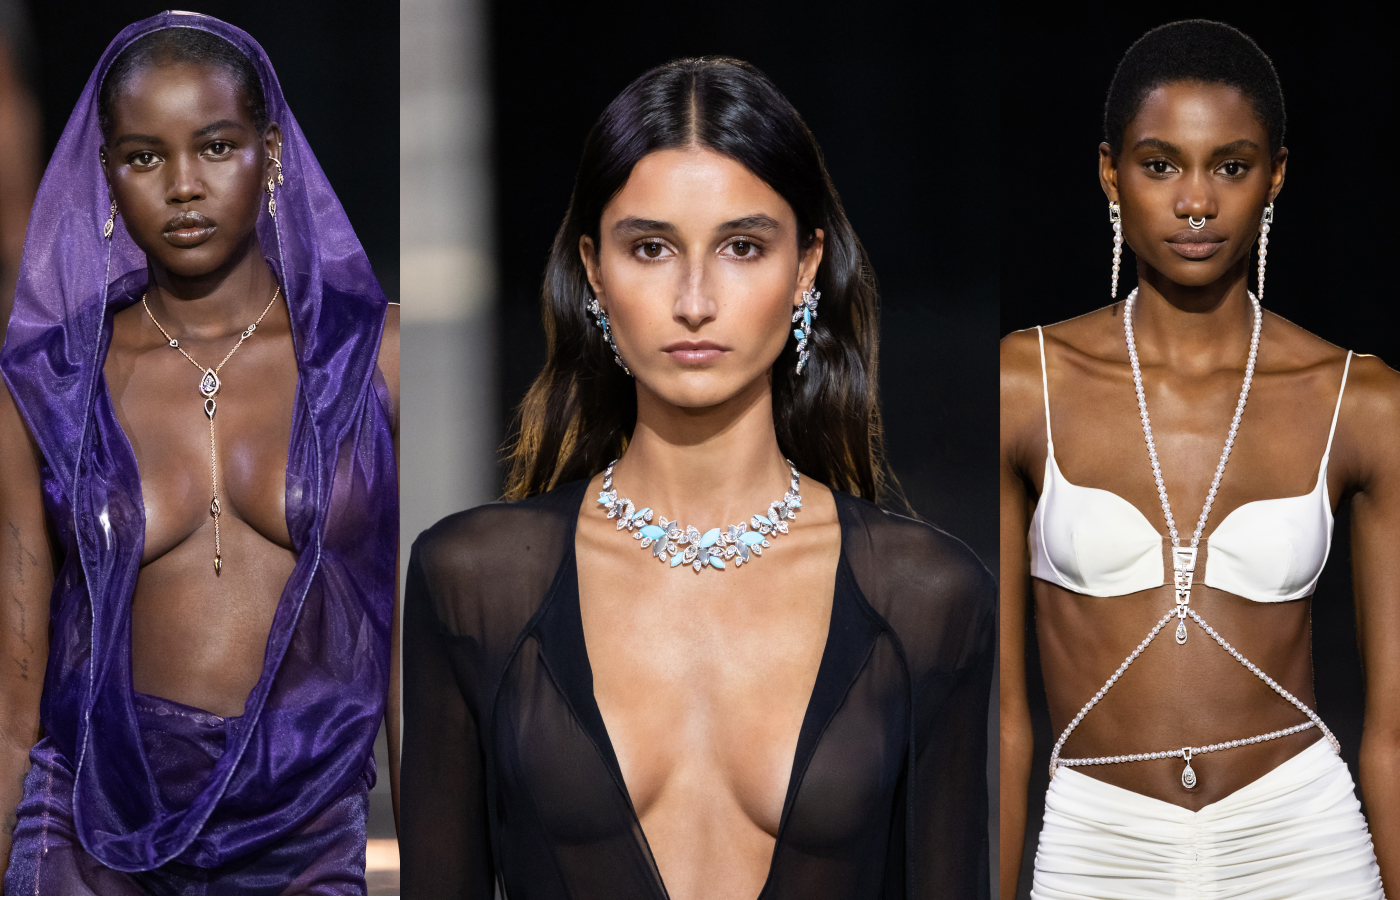 From left to right: Models wearing Messika Fiery high jewellery suite in rose gold and diamond, Blooming Euphoria suite in white gold turquoise and diamond, and Disco Pulsation suite in white gold, pearl and diamond